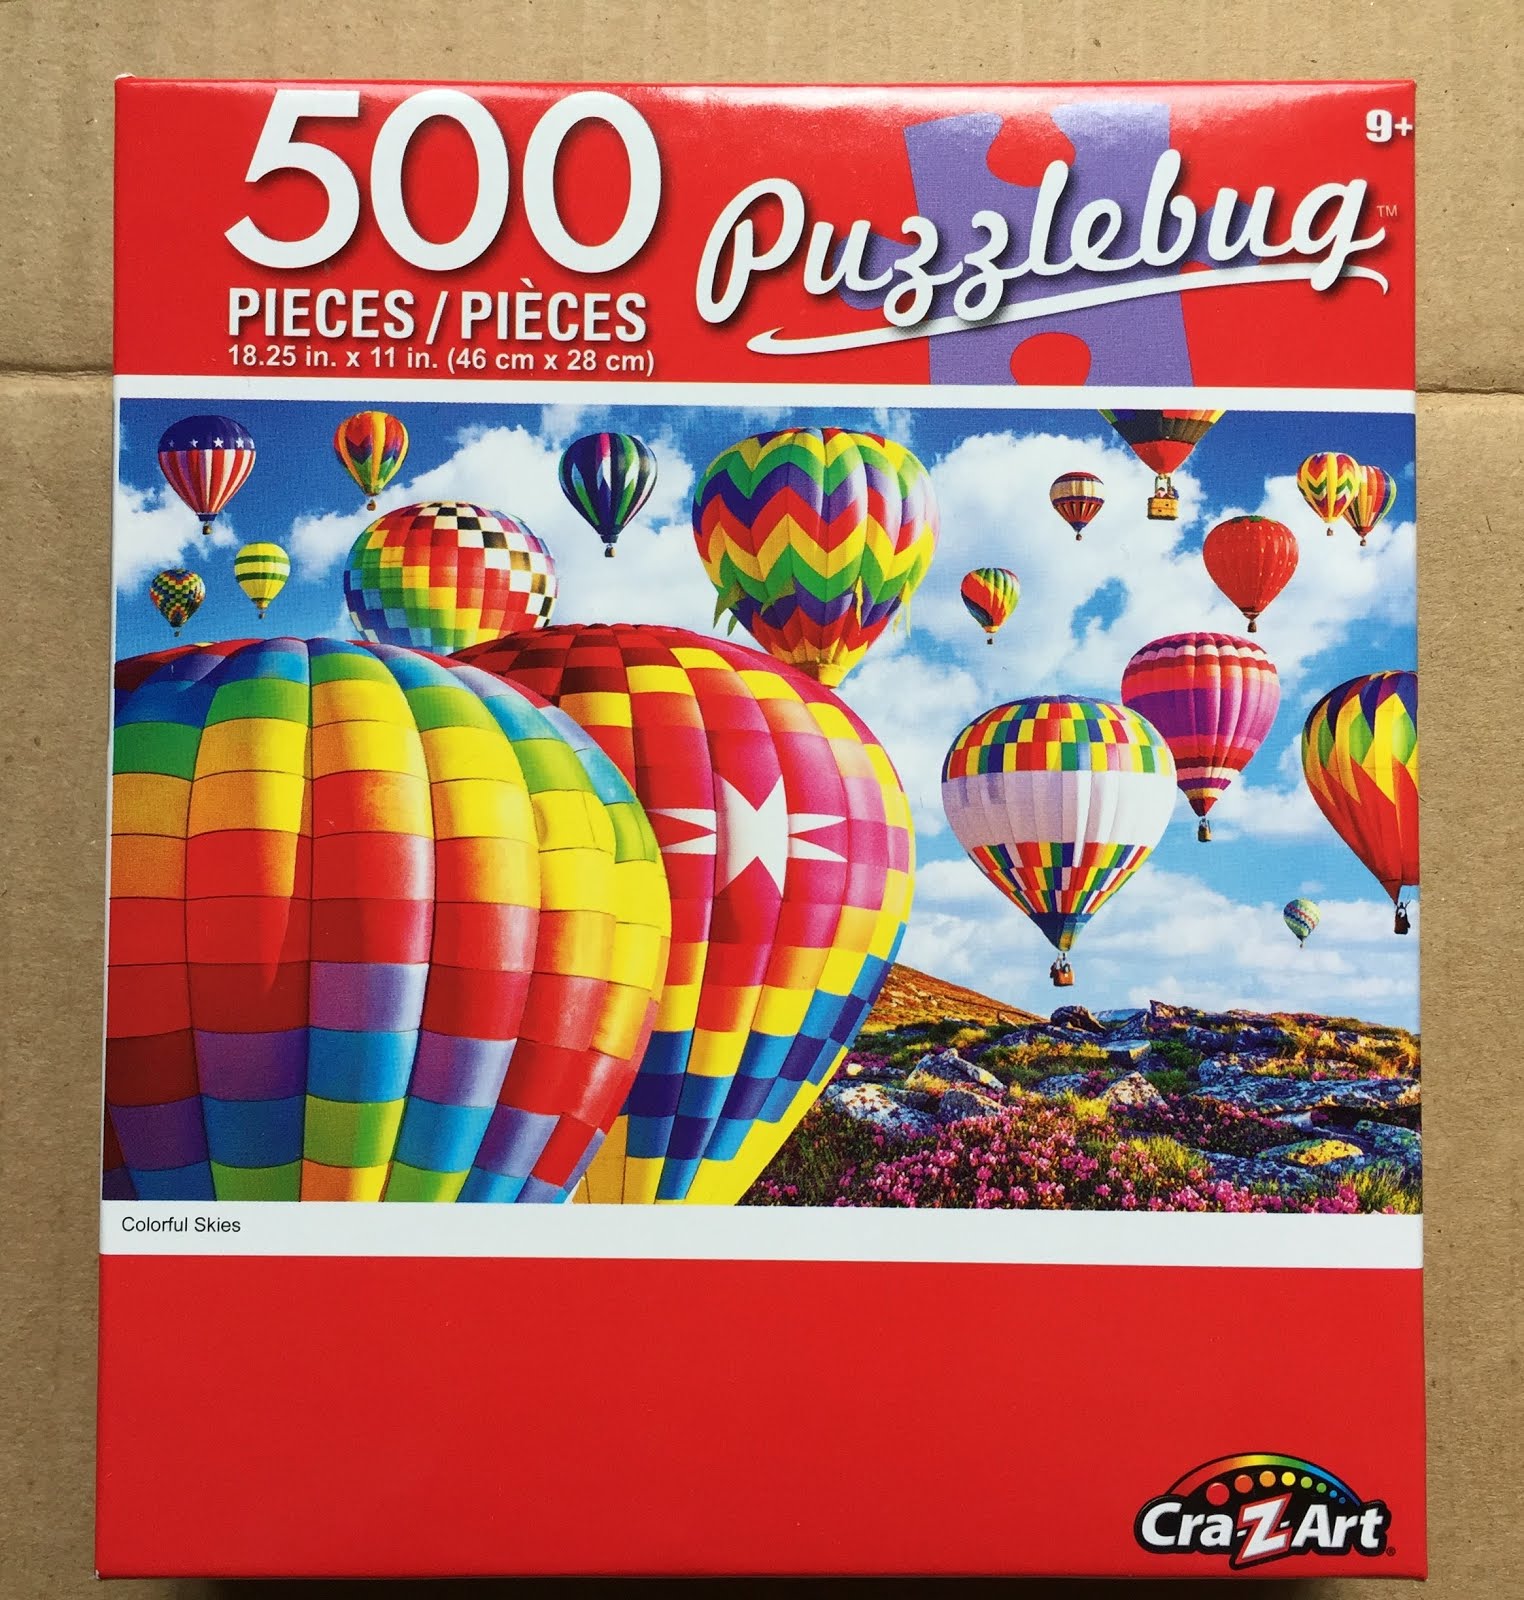 Puzzlebug 500 Piece Puzzle Review – Are Dollar Store Puzzles Any Good?